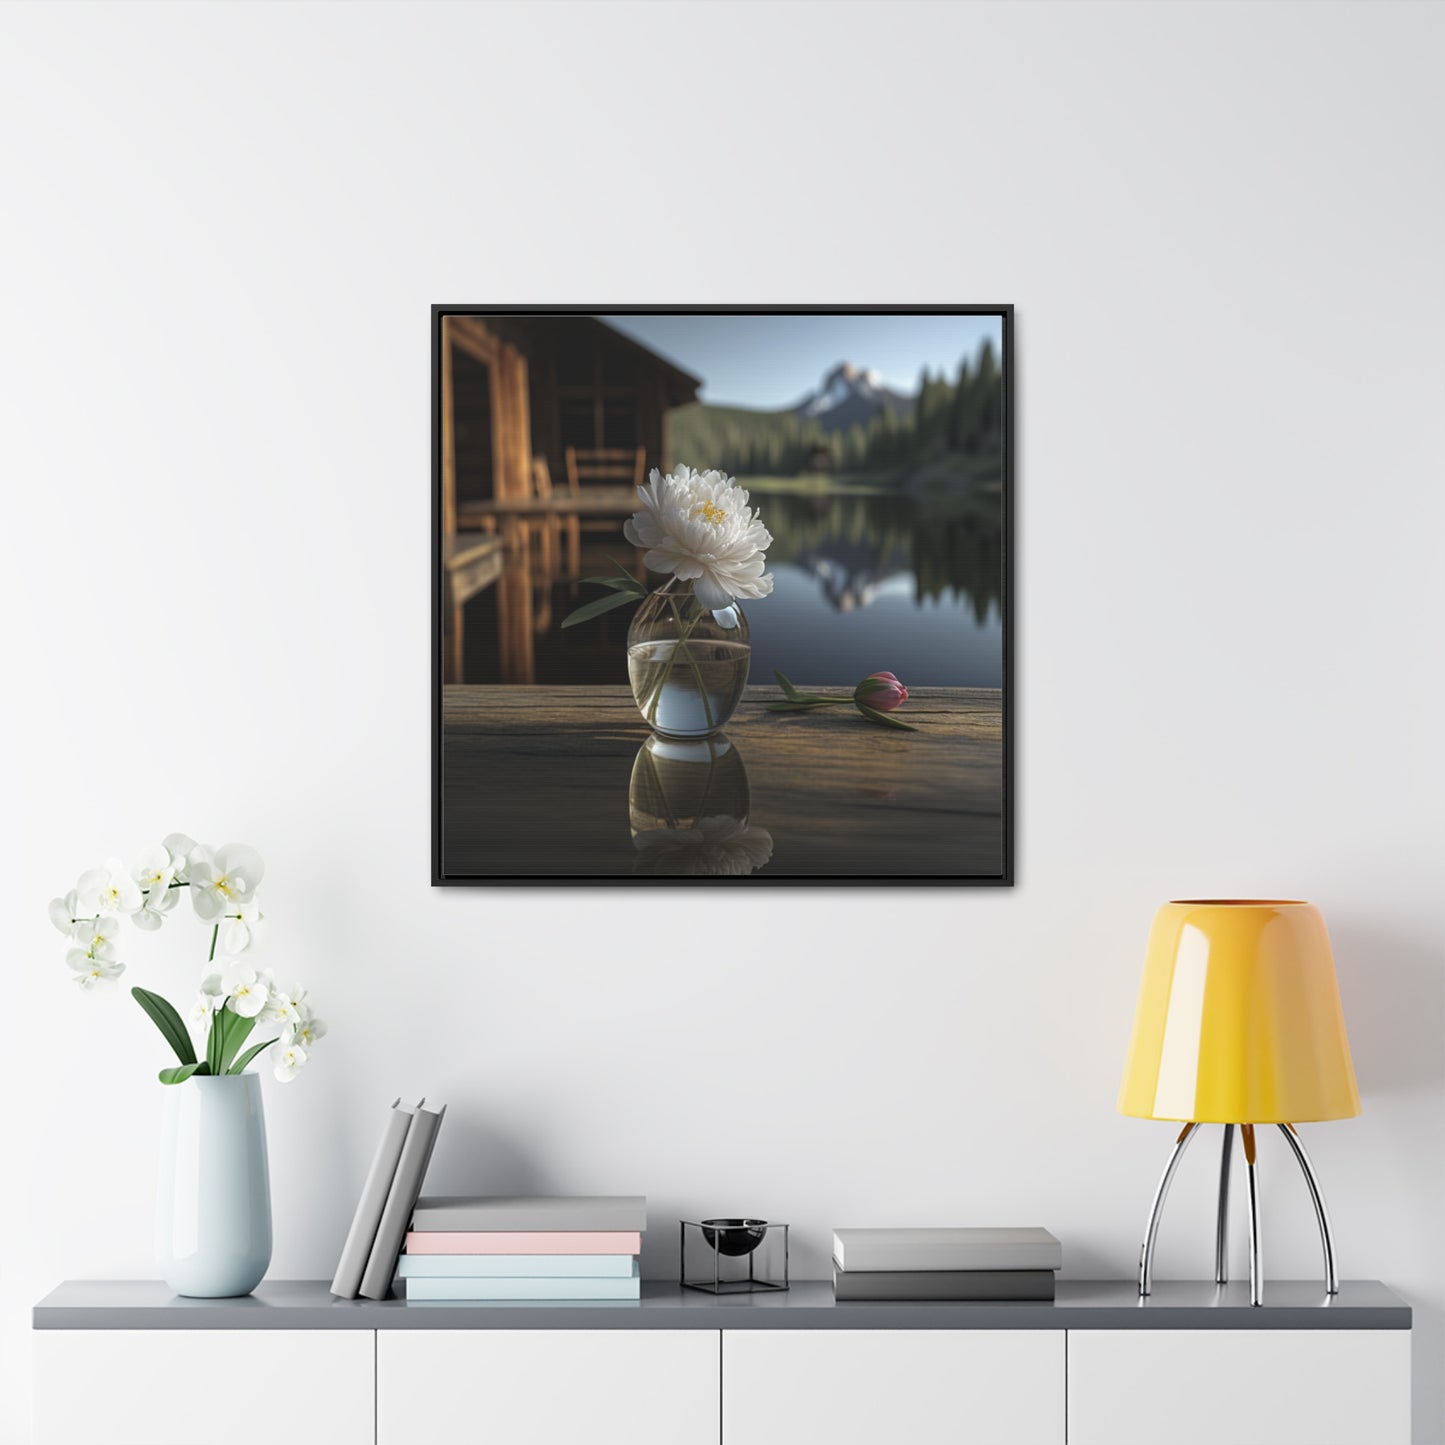 Gallery Canvas Wraps, Square Frame White Peony glass vase 4